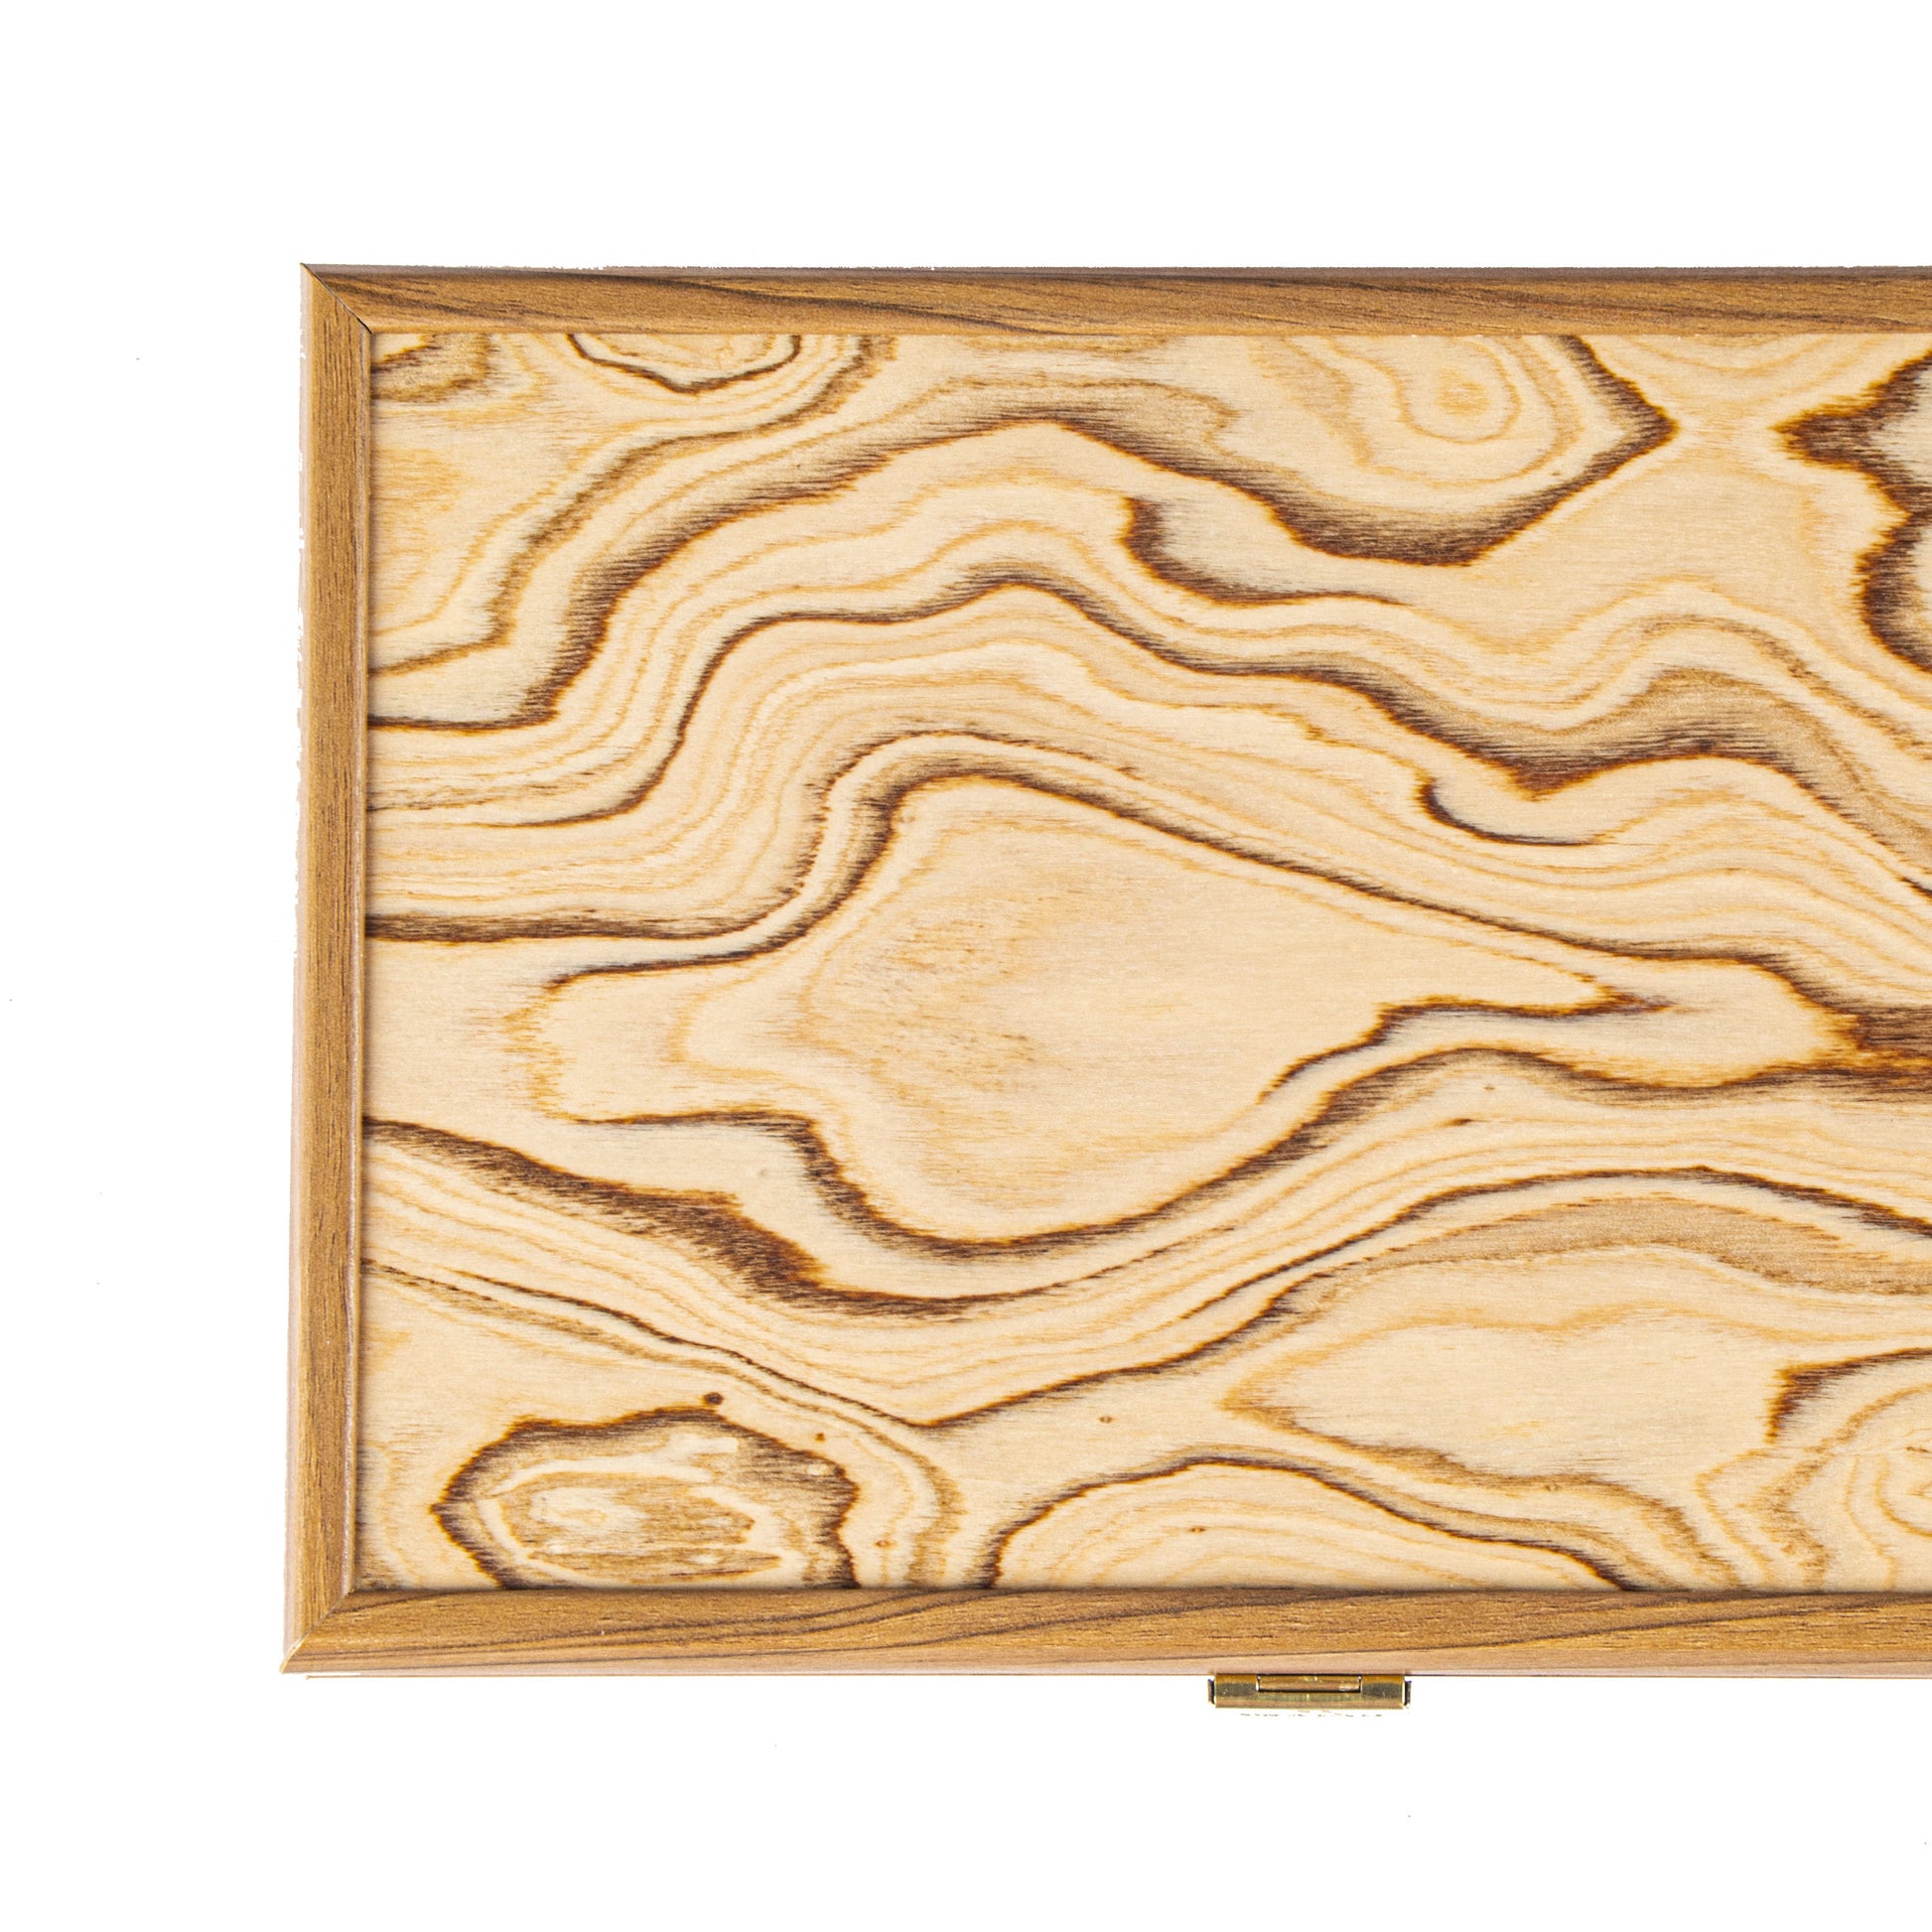 Luxury Walnut Wooden Box with Natural Italian Olive Burl Top - Handcrafted Elegance - Premium Decorative Objects from MANOPOULOS Chess & Backgammon - Just €38.50! Shop now at MANOPOULOS Chess & Backgammon